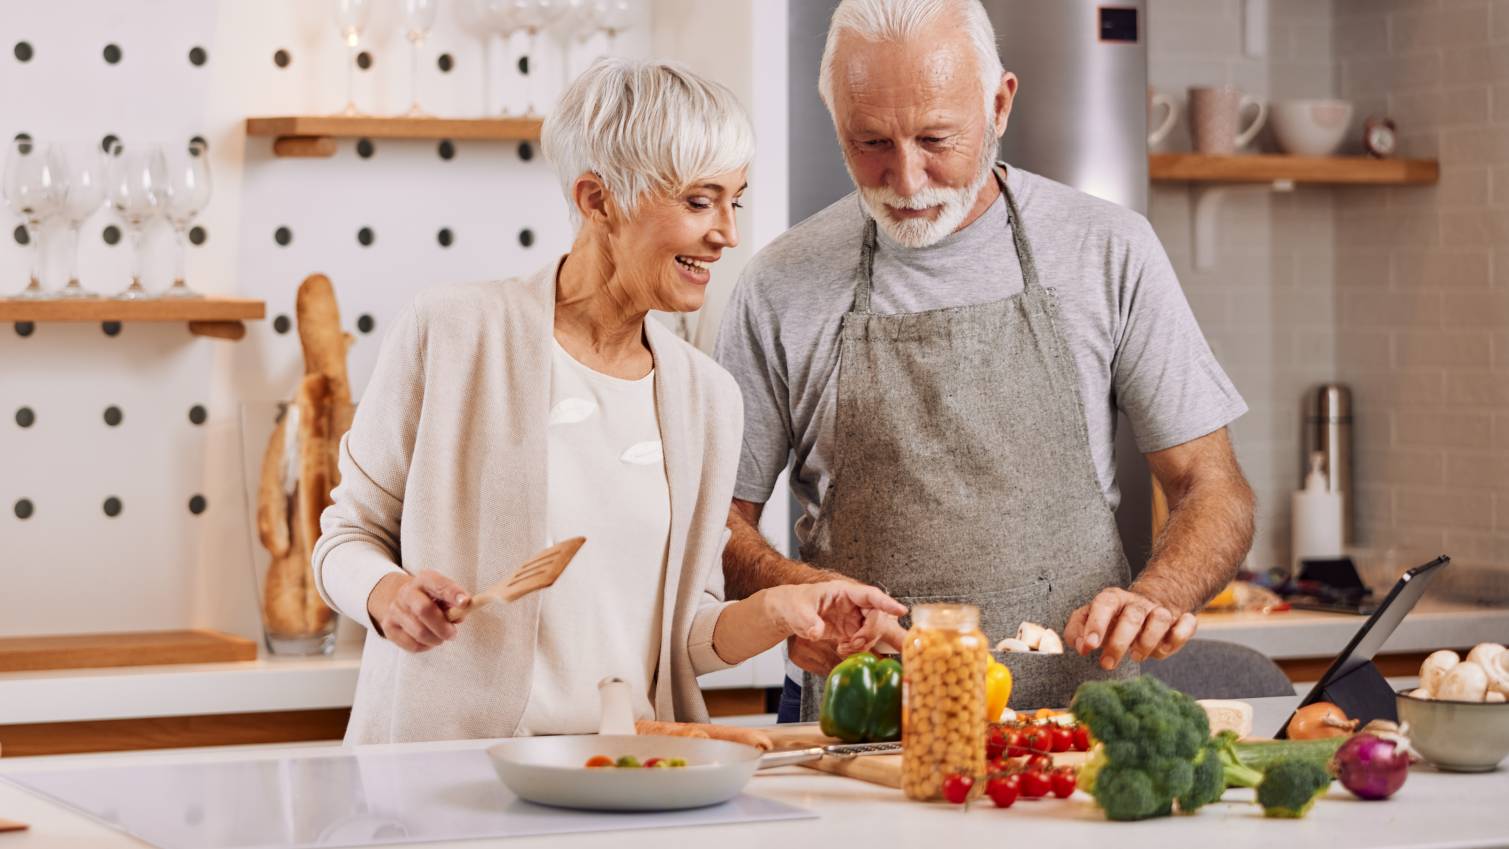 Plant-Based Protein Supports Healthy Aging